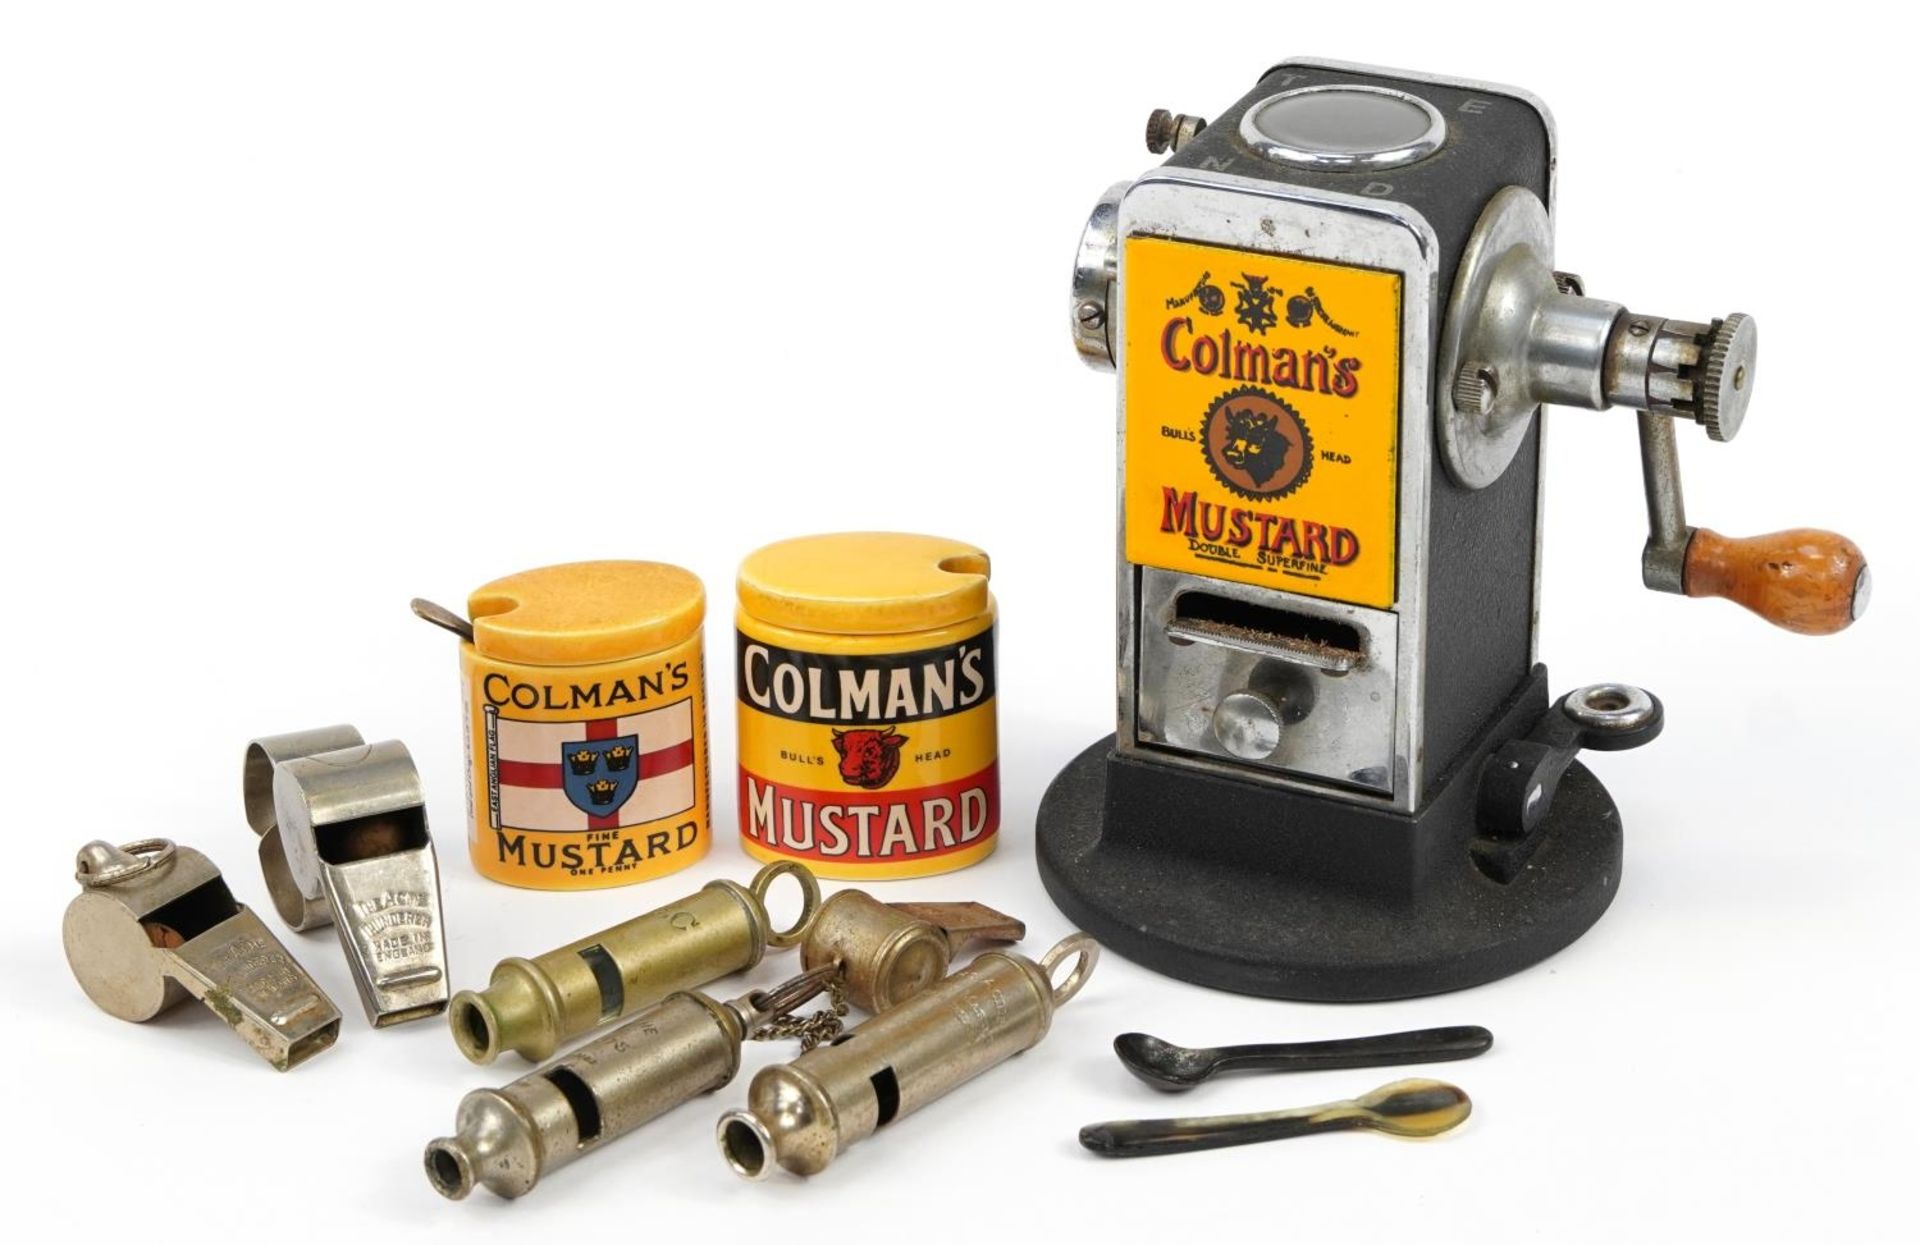 Vintage enamelled Coleman's Mustard pencil sharpener, mustard jars and whistles including The Acme